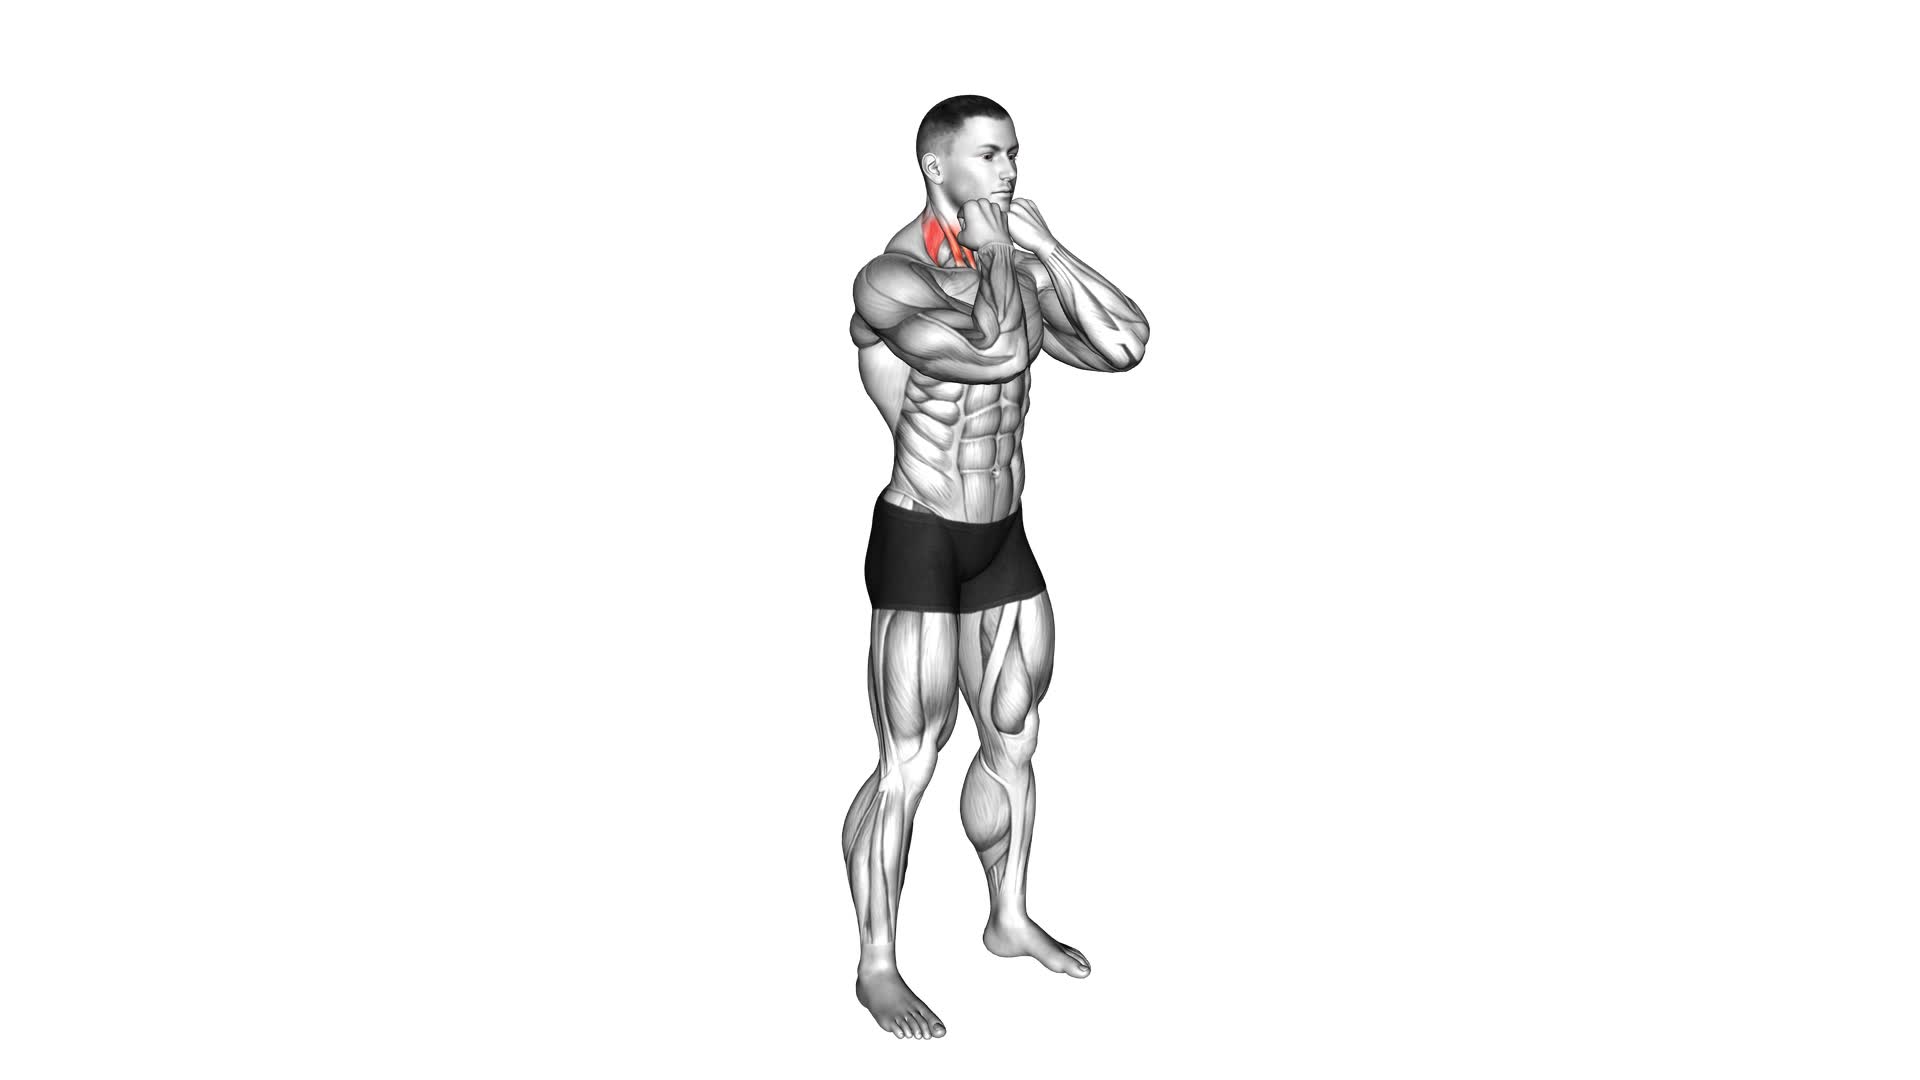 5 Sec Fist Against Chin (male) - Video Exercise Guide & Tips